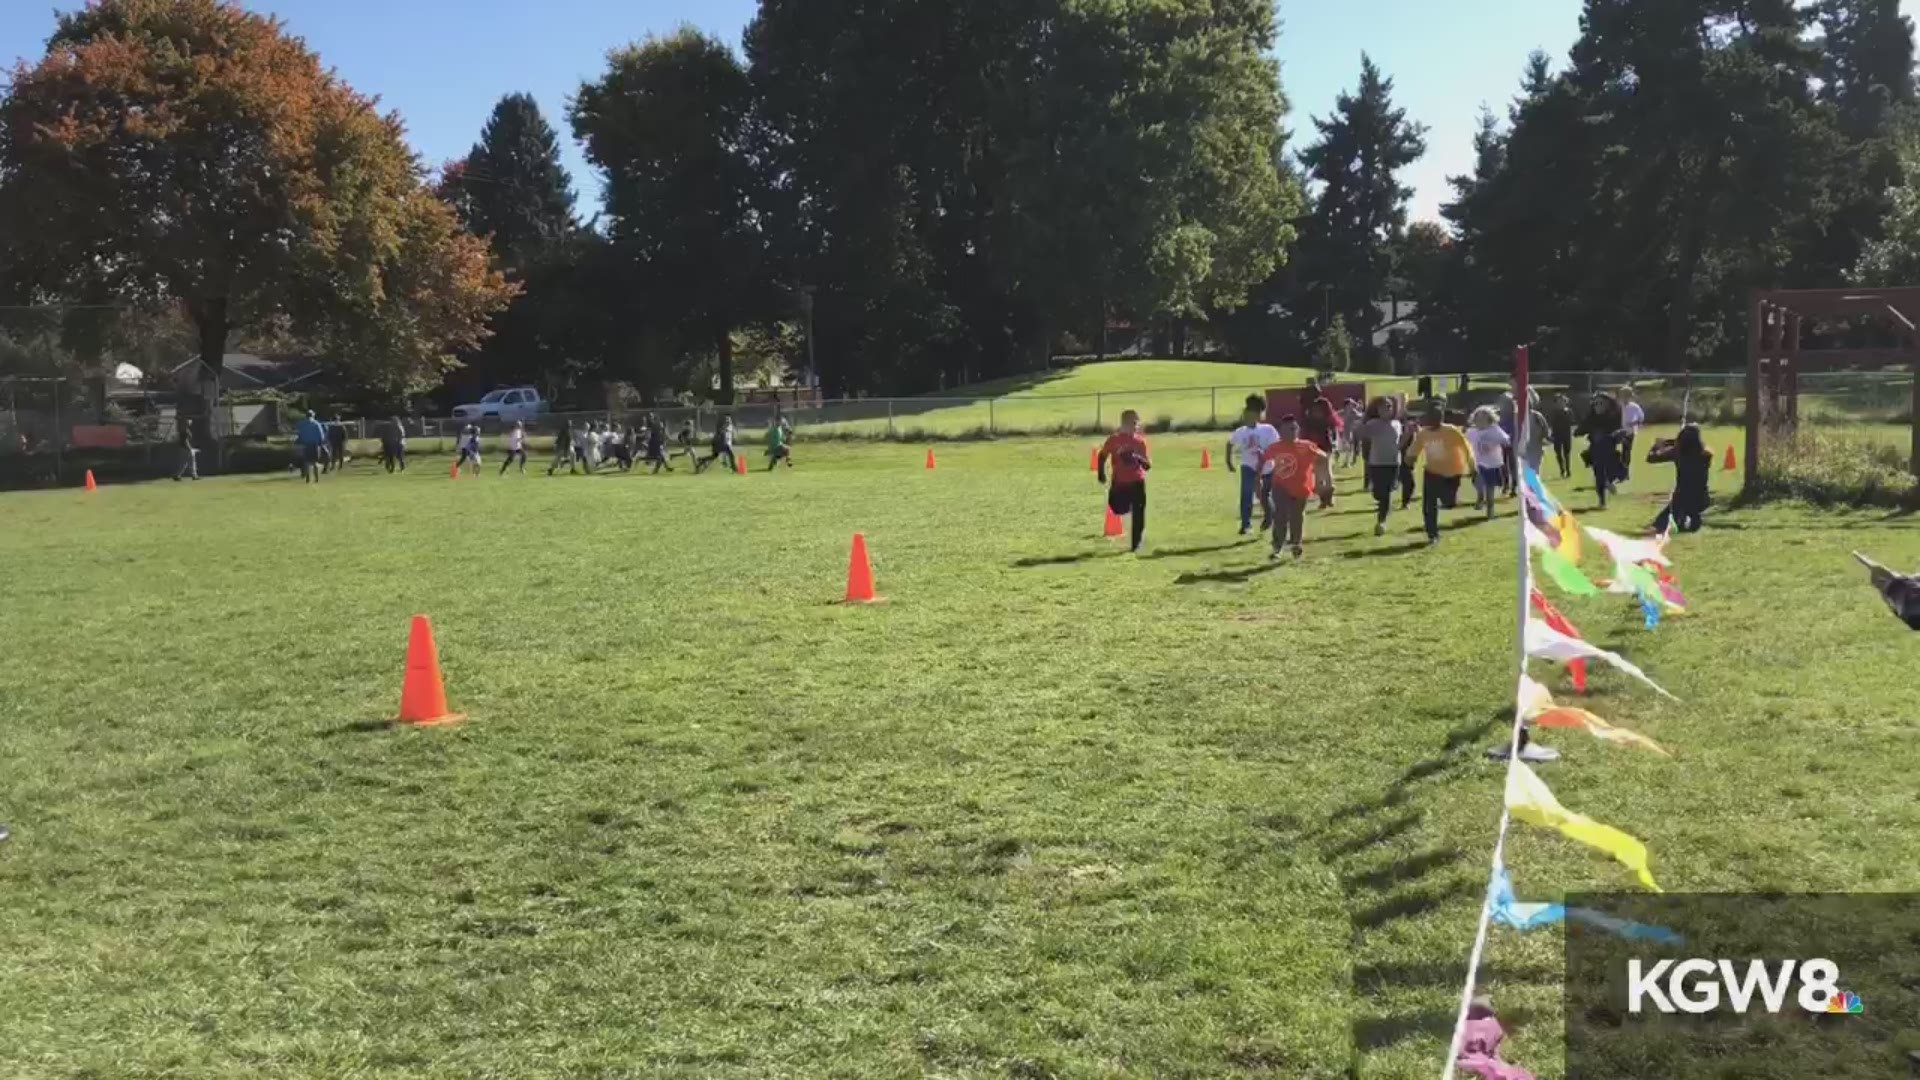 KGW staffers were there as students ran laps to raise money during the annual fundraiser “Run for Woodlawn" at Woodlawn Elementary School.